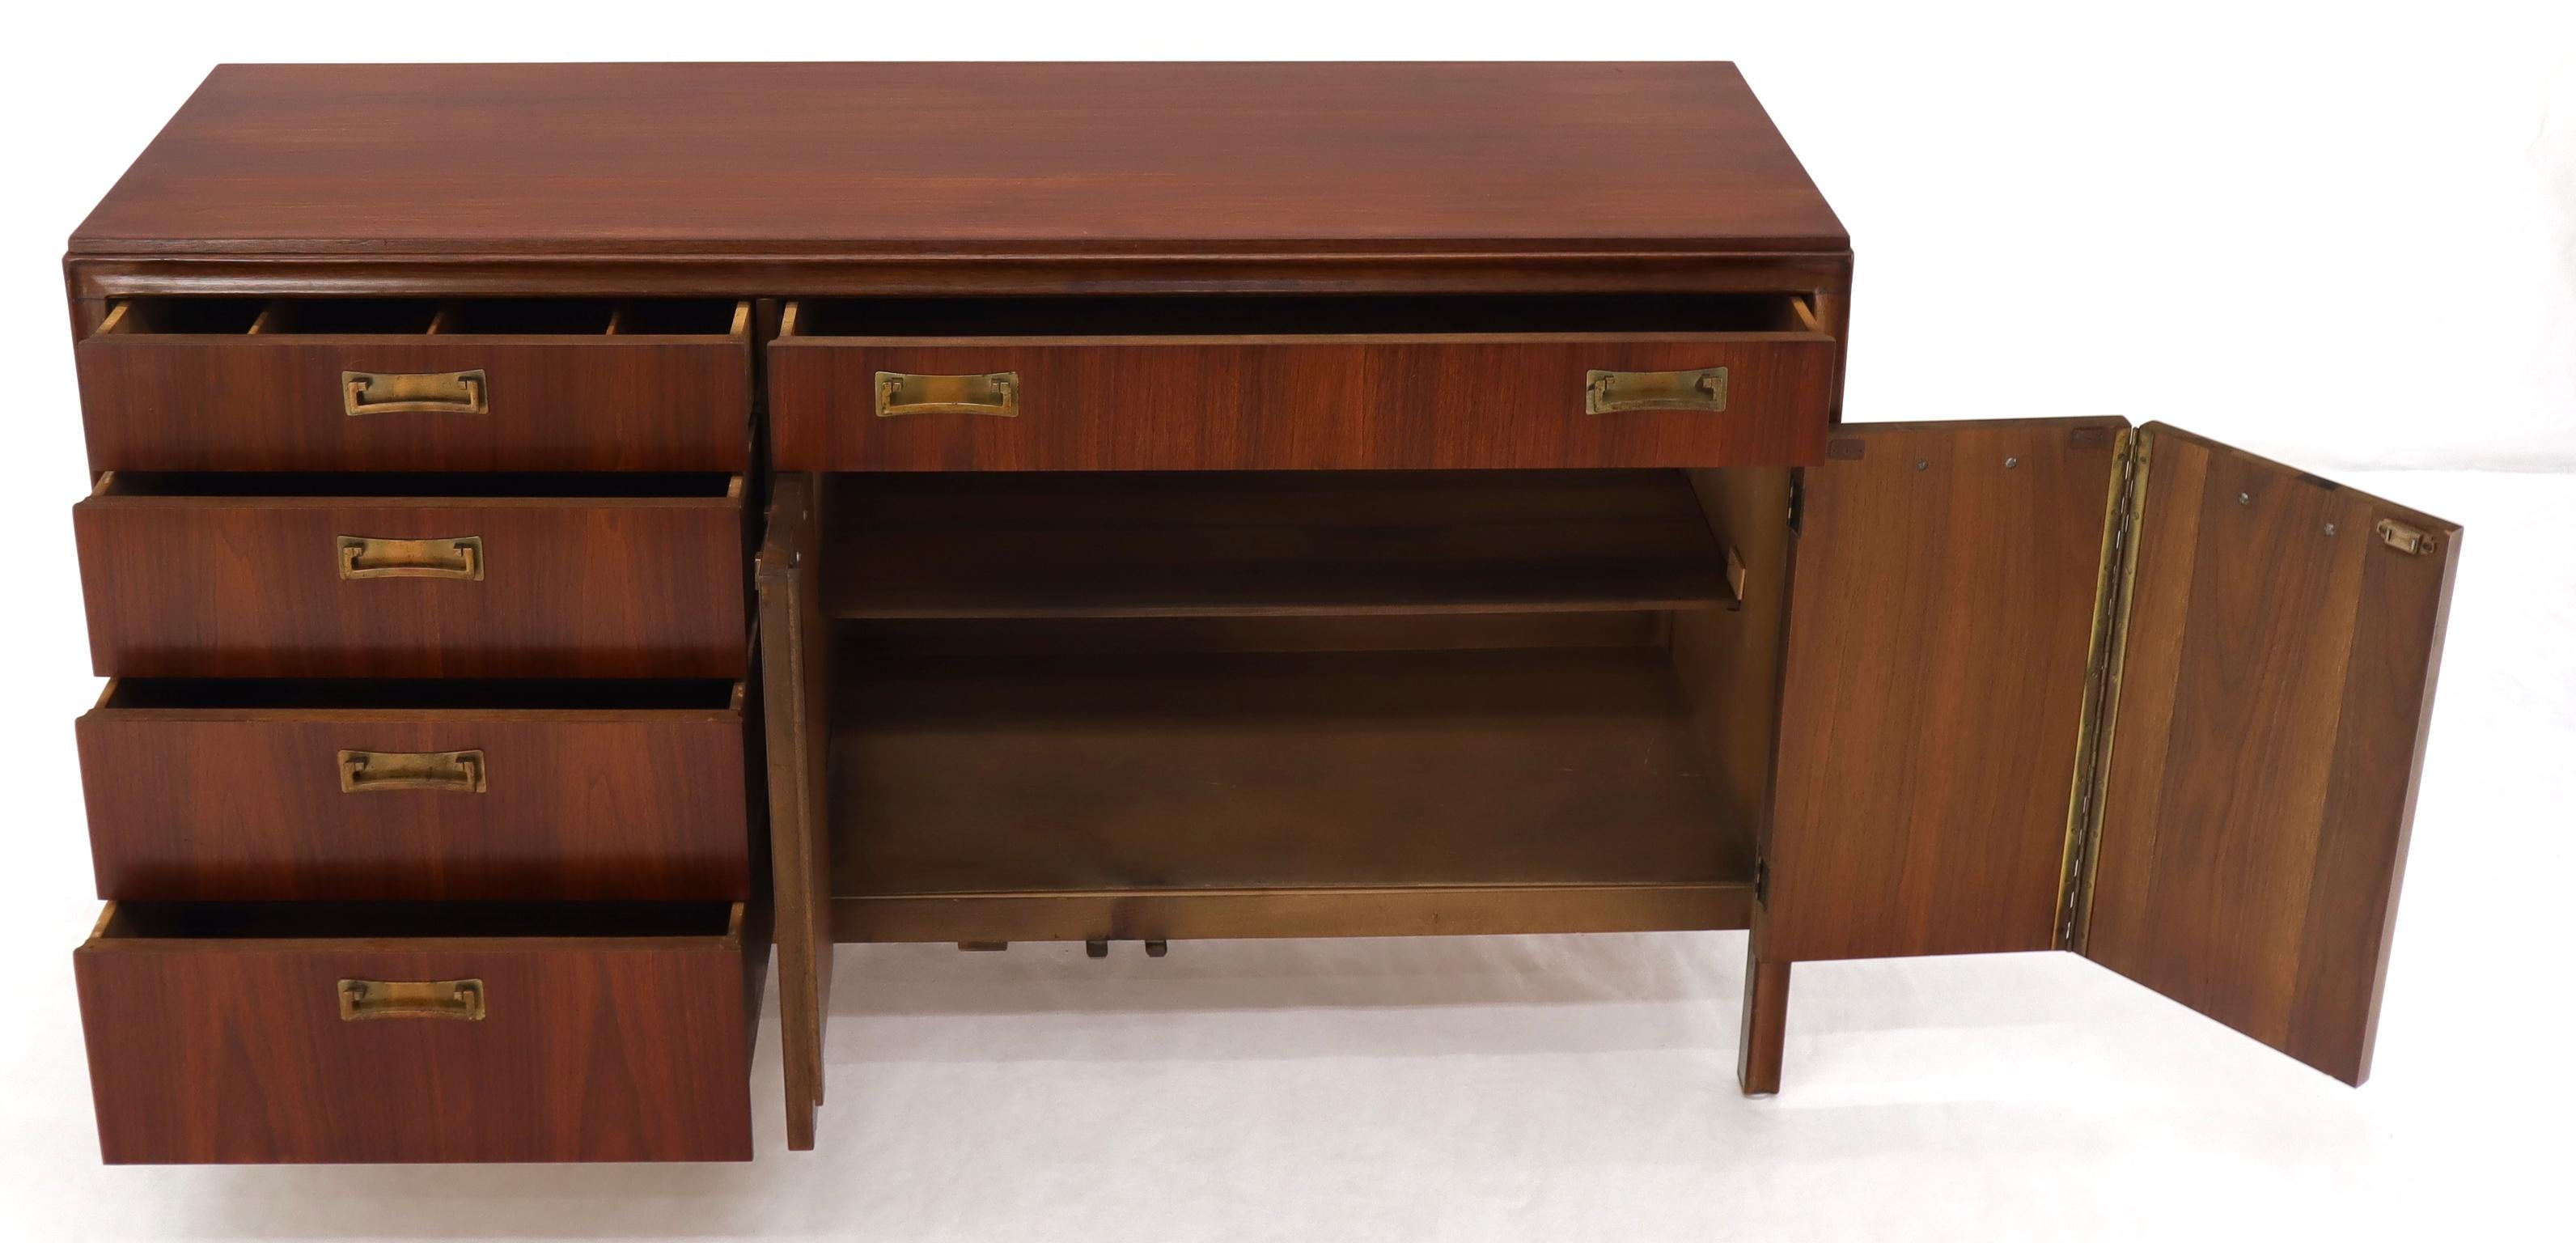 20th Century Mid-Century Modern Credenza Dresser Cabinet with Bifold Door and Five Drawers For Sale